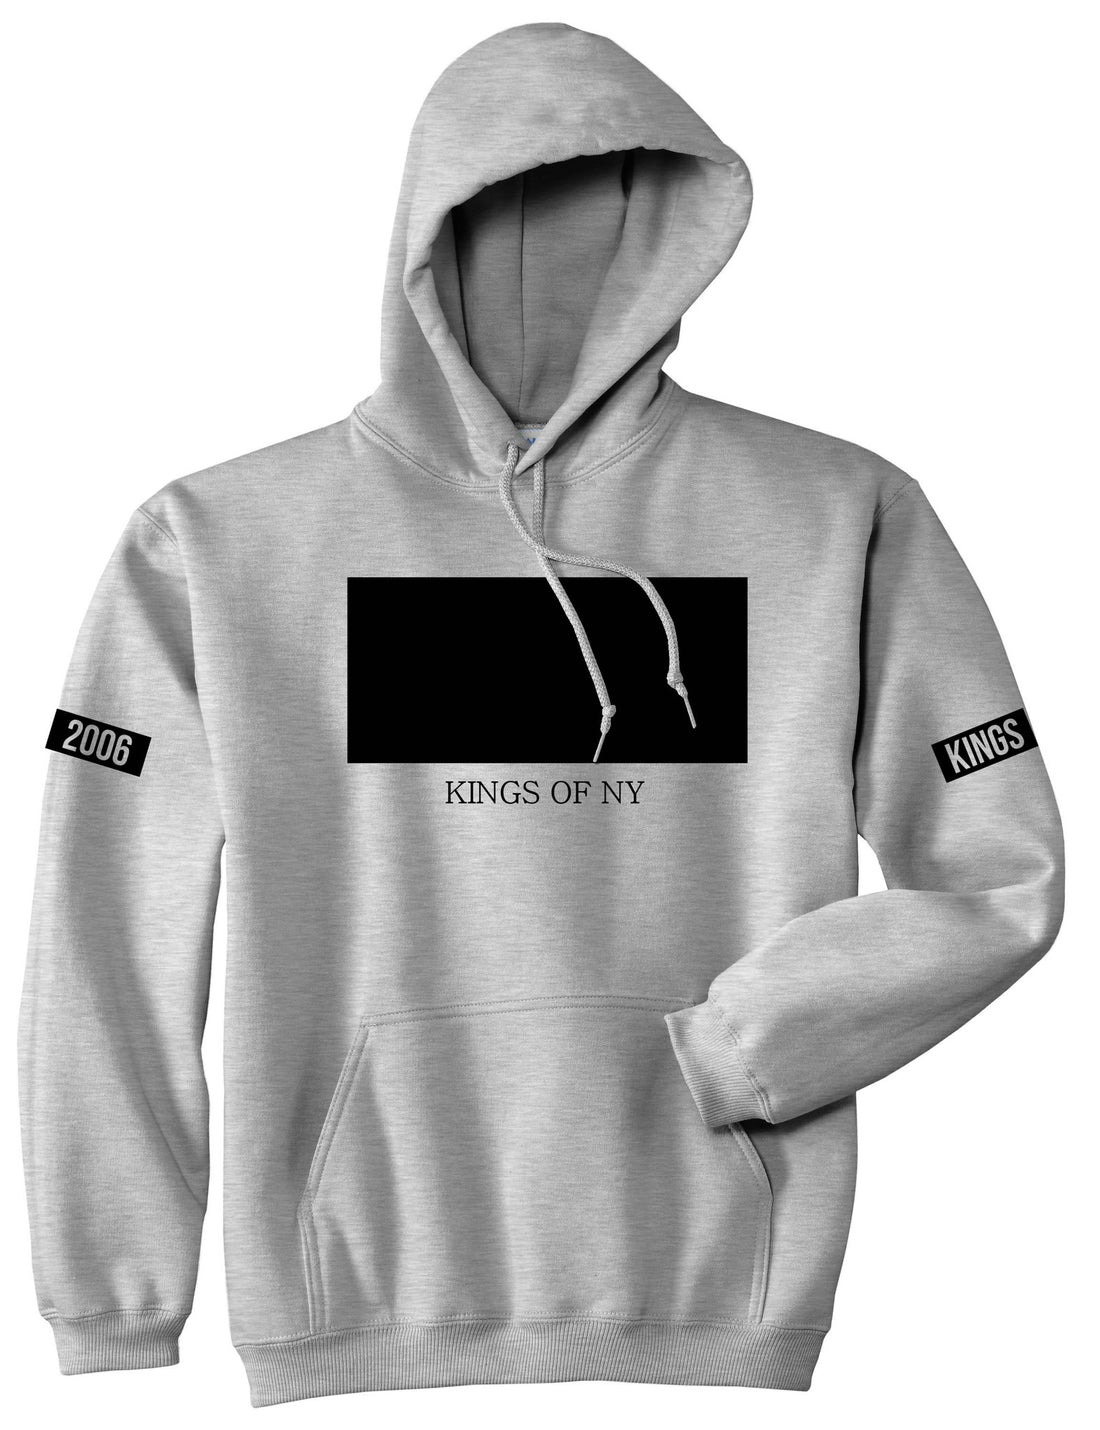 White Box Pullover Hoodie Hoody in Grey by Kings Of NY